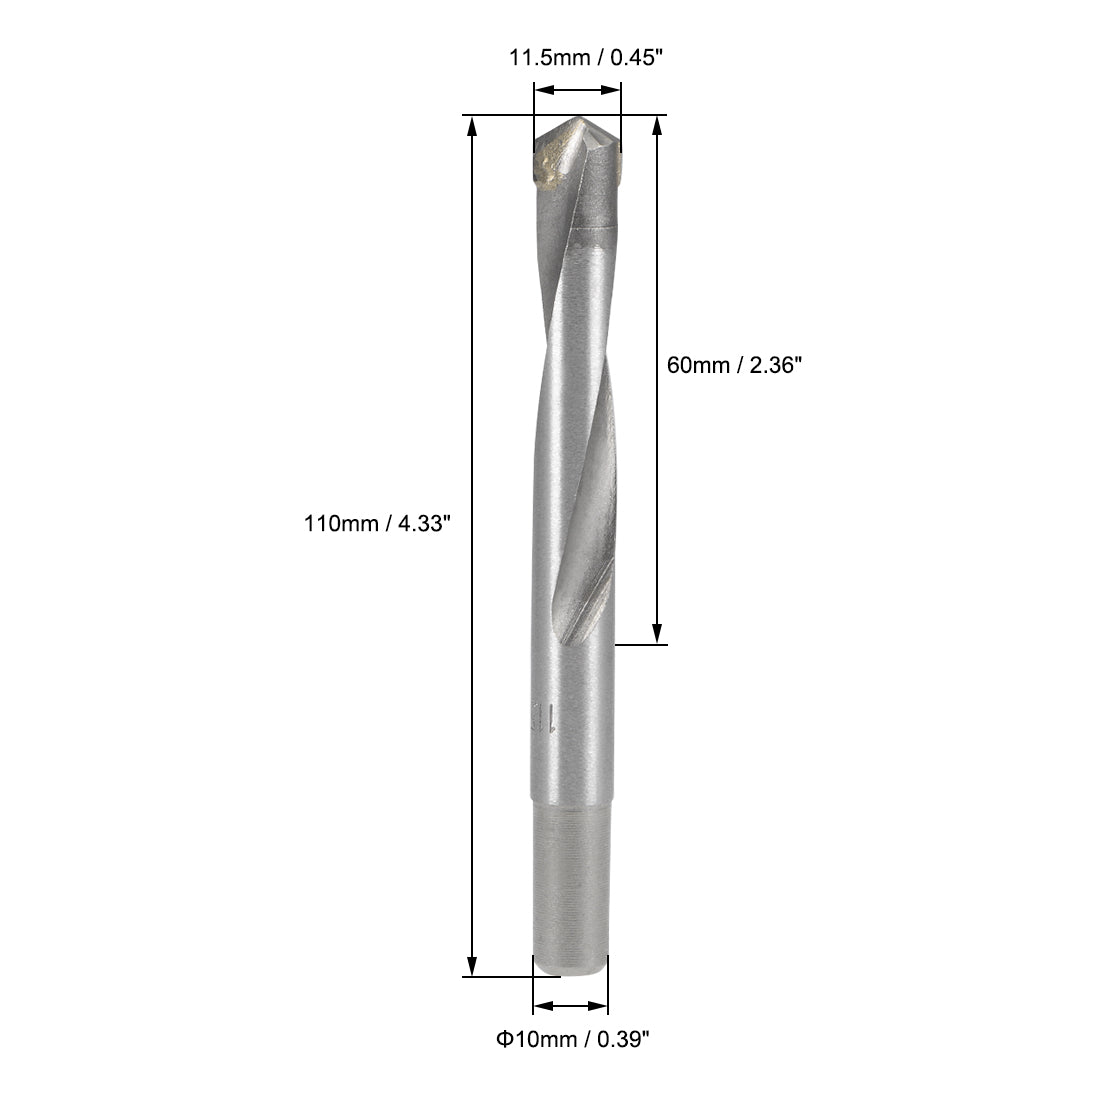 uxcell Uxcell 11.5mm Cemented Carbide Twist Drill Bit for Stainless Steel Copper Aluminum 2Pcs